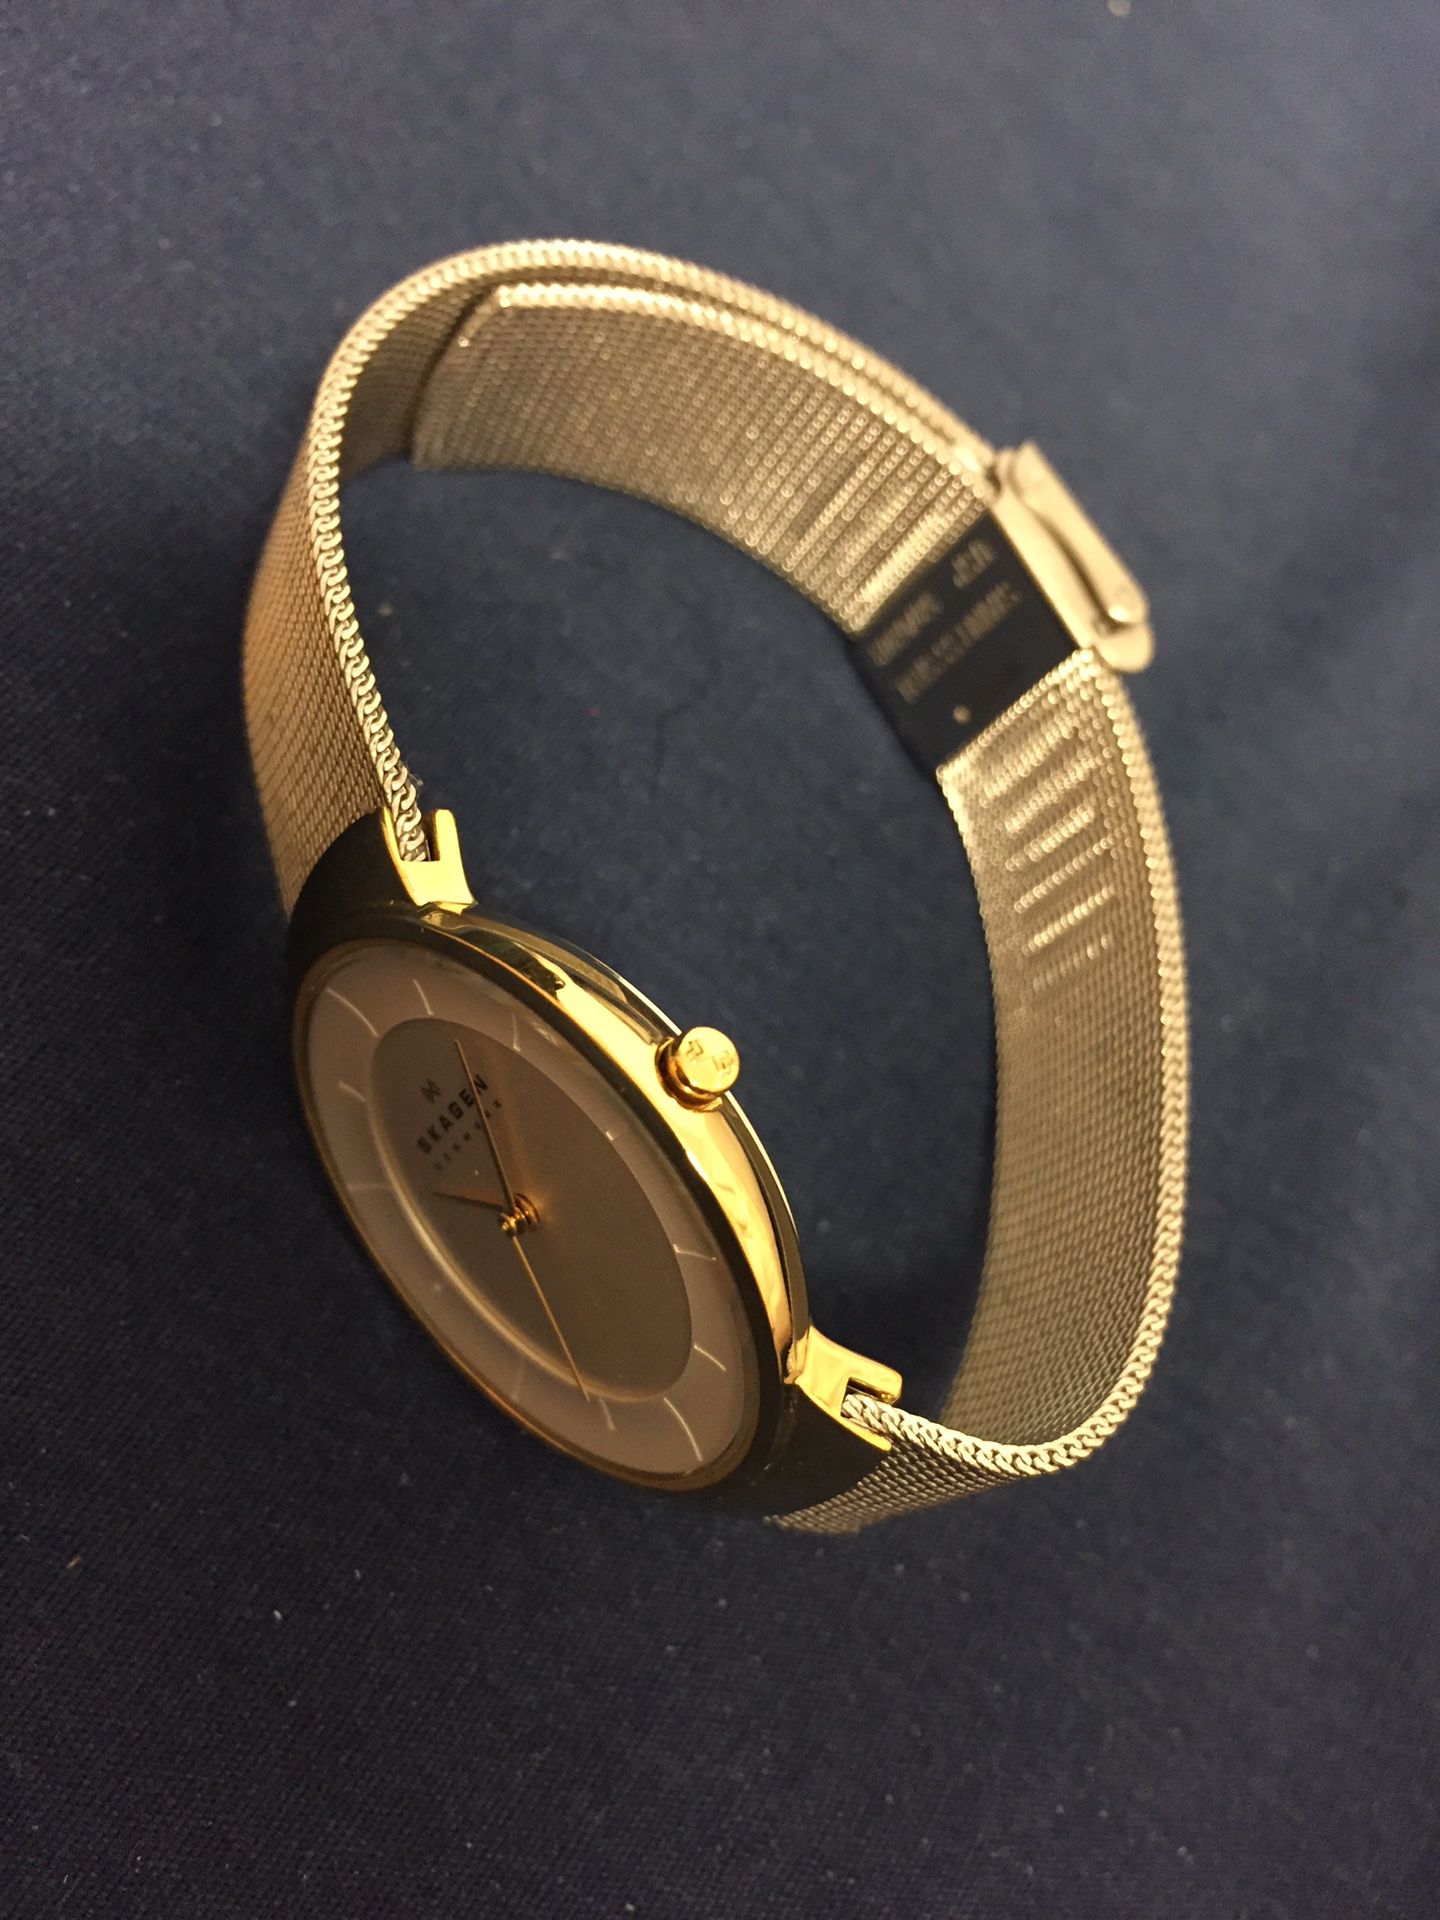 Genuine Skagen SKW2075 ladies slightly used quartz watch. Made in Denmark. local pickup only, I don't deliver , no PayPal cash only